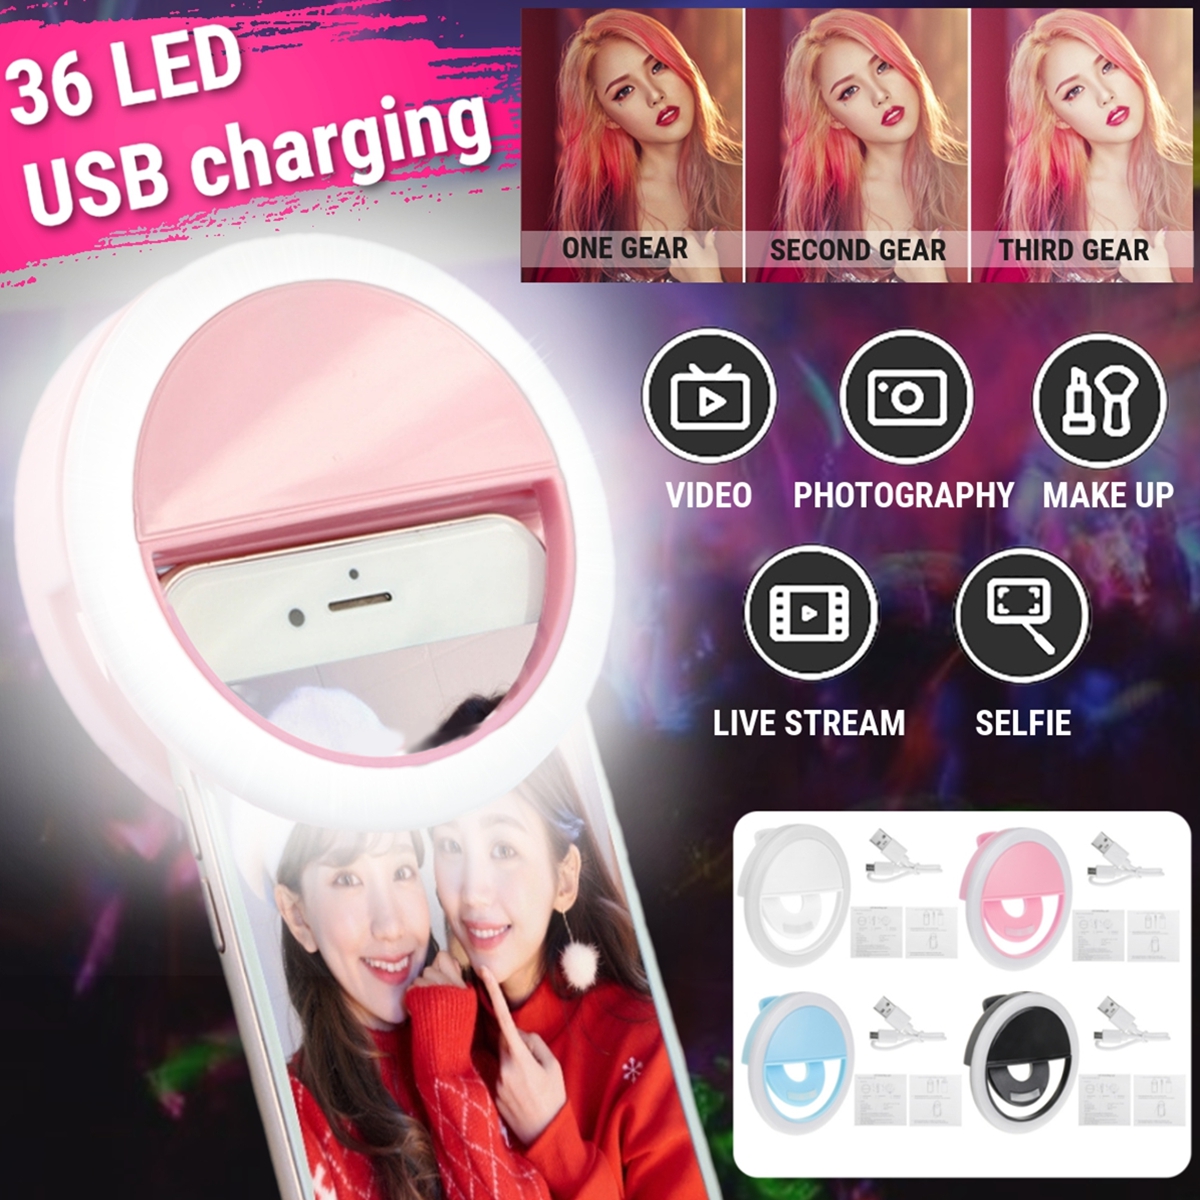 Bakeey Selfie 36 LEDS Fill Lamp Ring Light Universal Clip 3 levels Brightness For Cell Phone